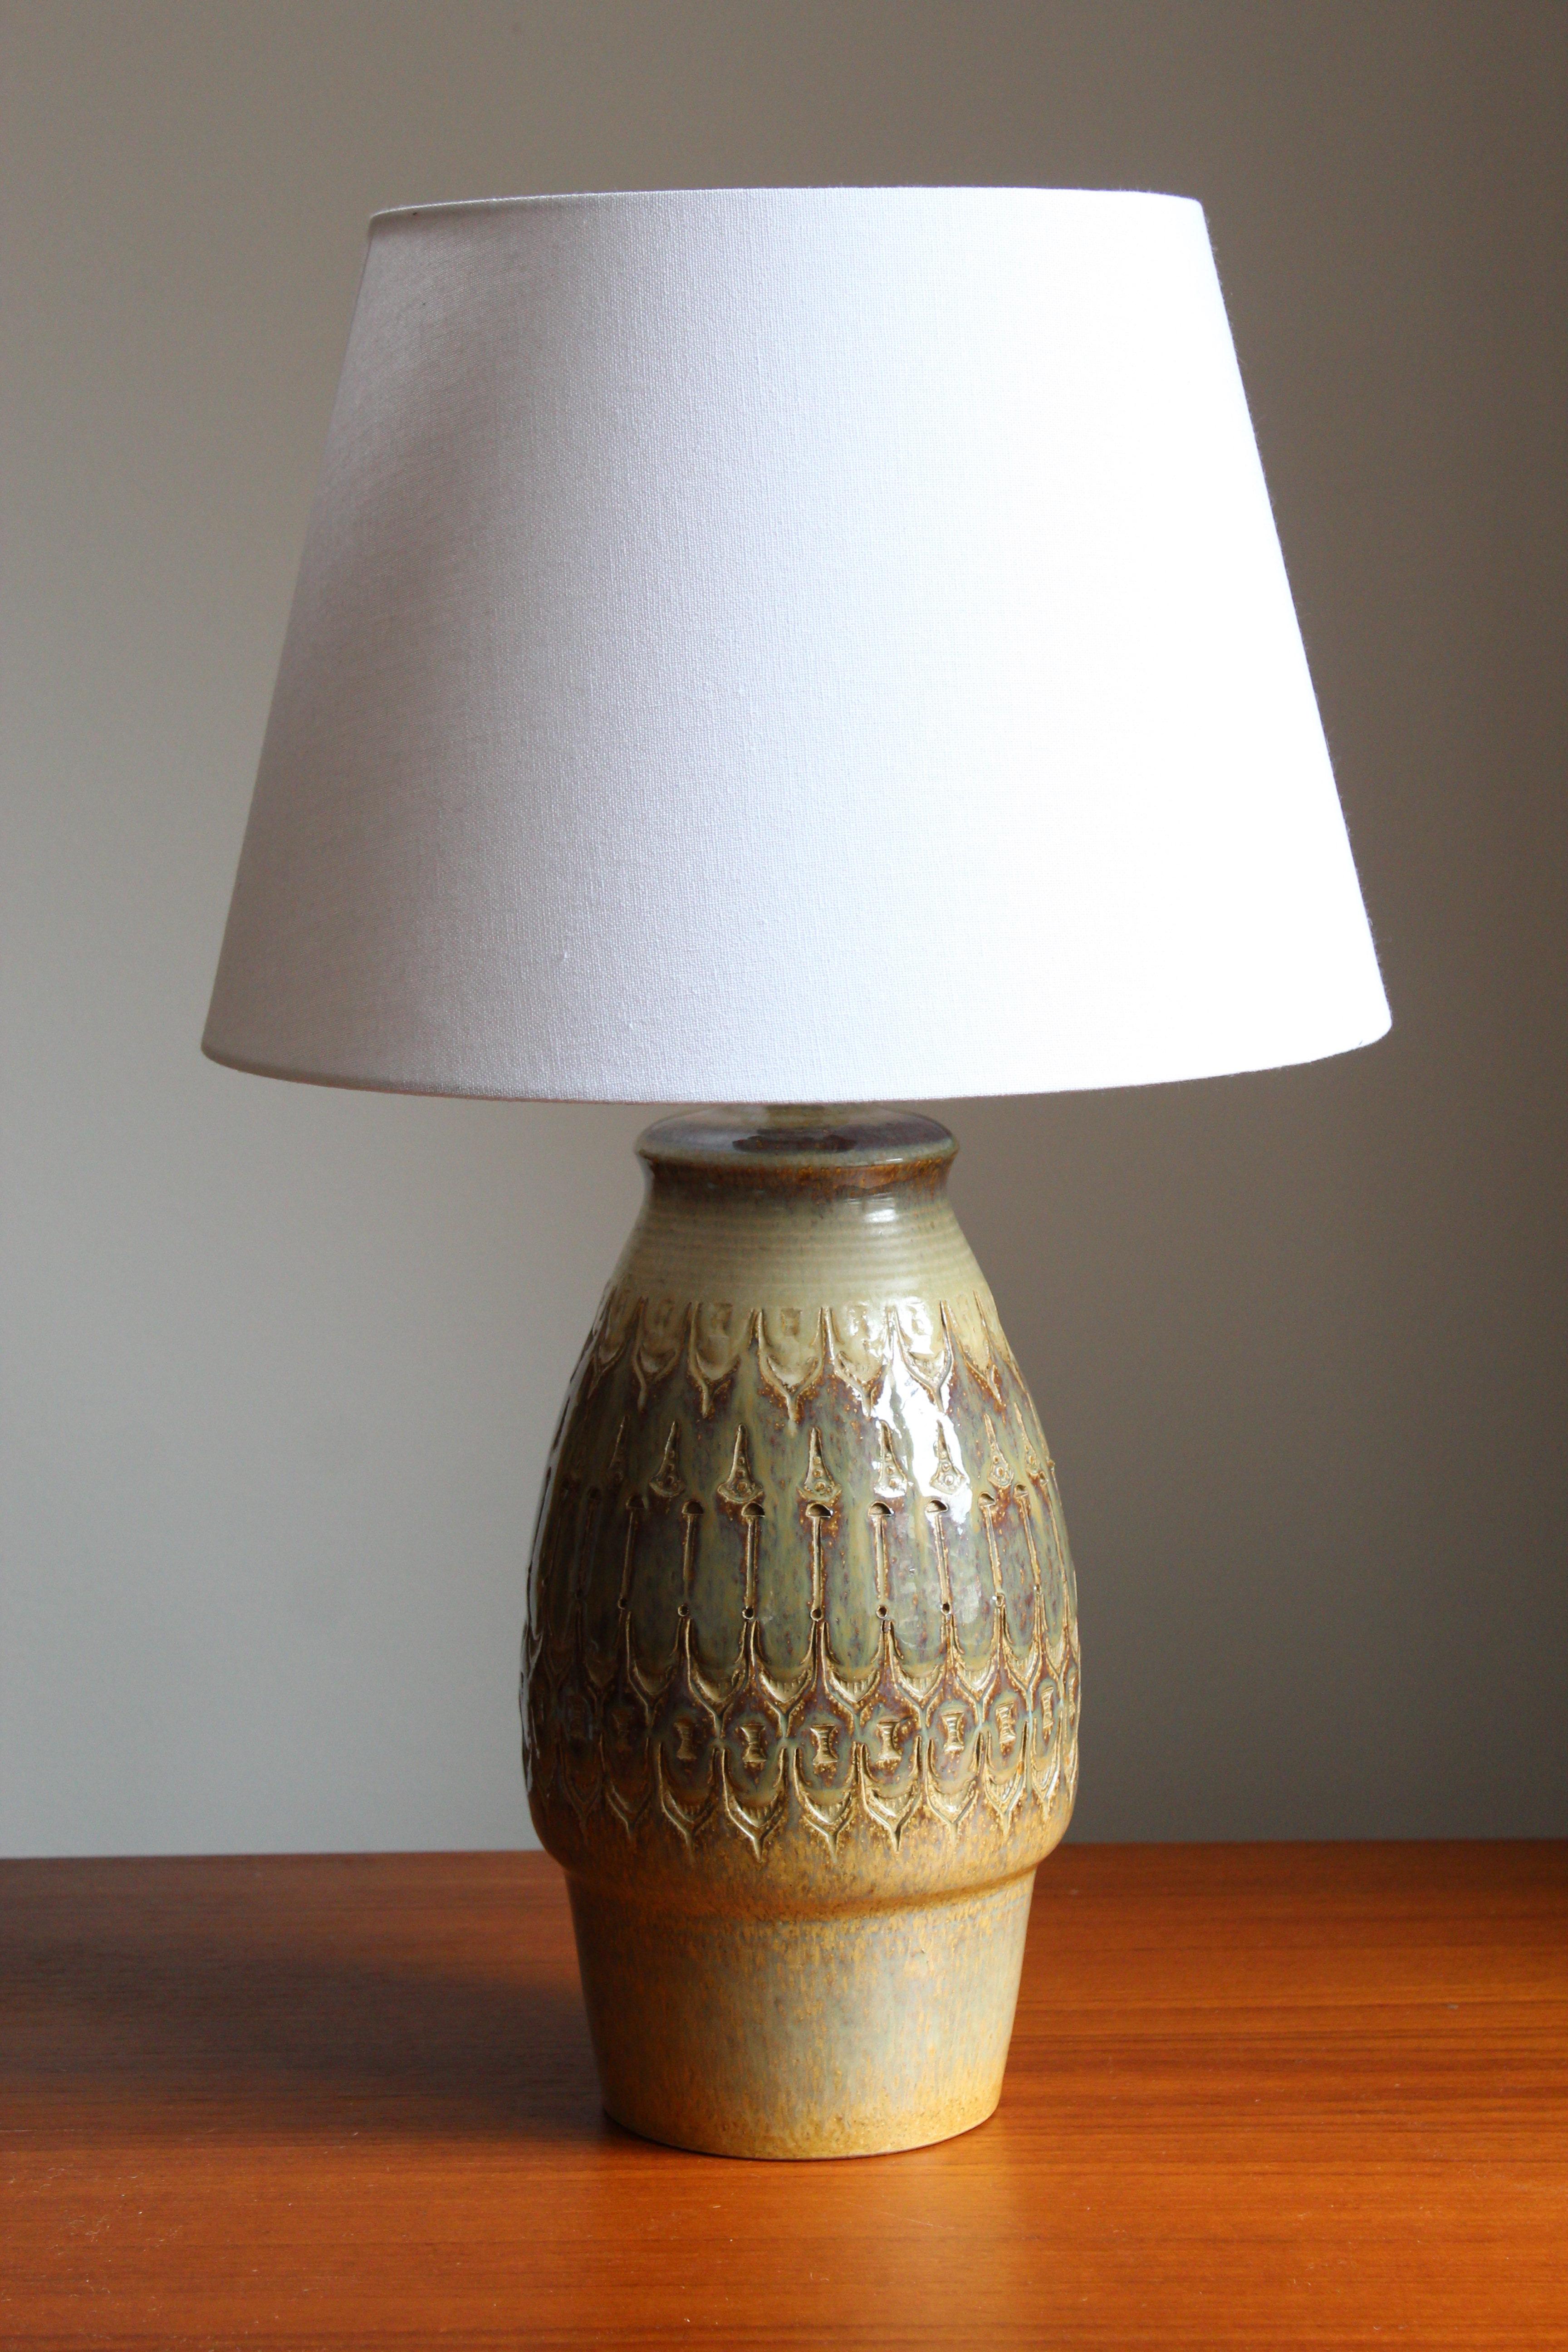 A large table lamp produced by Søholm Keramik, located on the island of Bornholm in Denmark. Features a highly artistic glazed and incised decor.

Sold without lampshade. Stated dimensions exclude the lampshade.

Glaze features brown-green